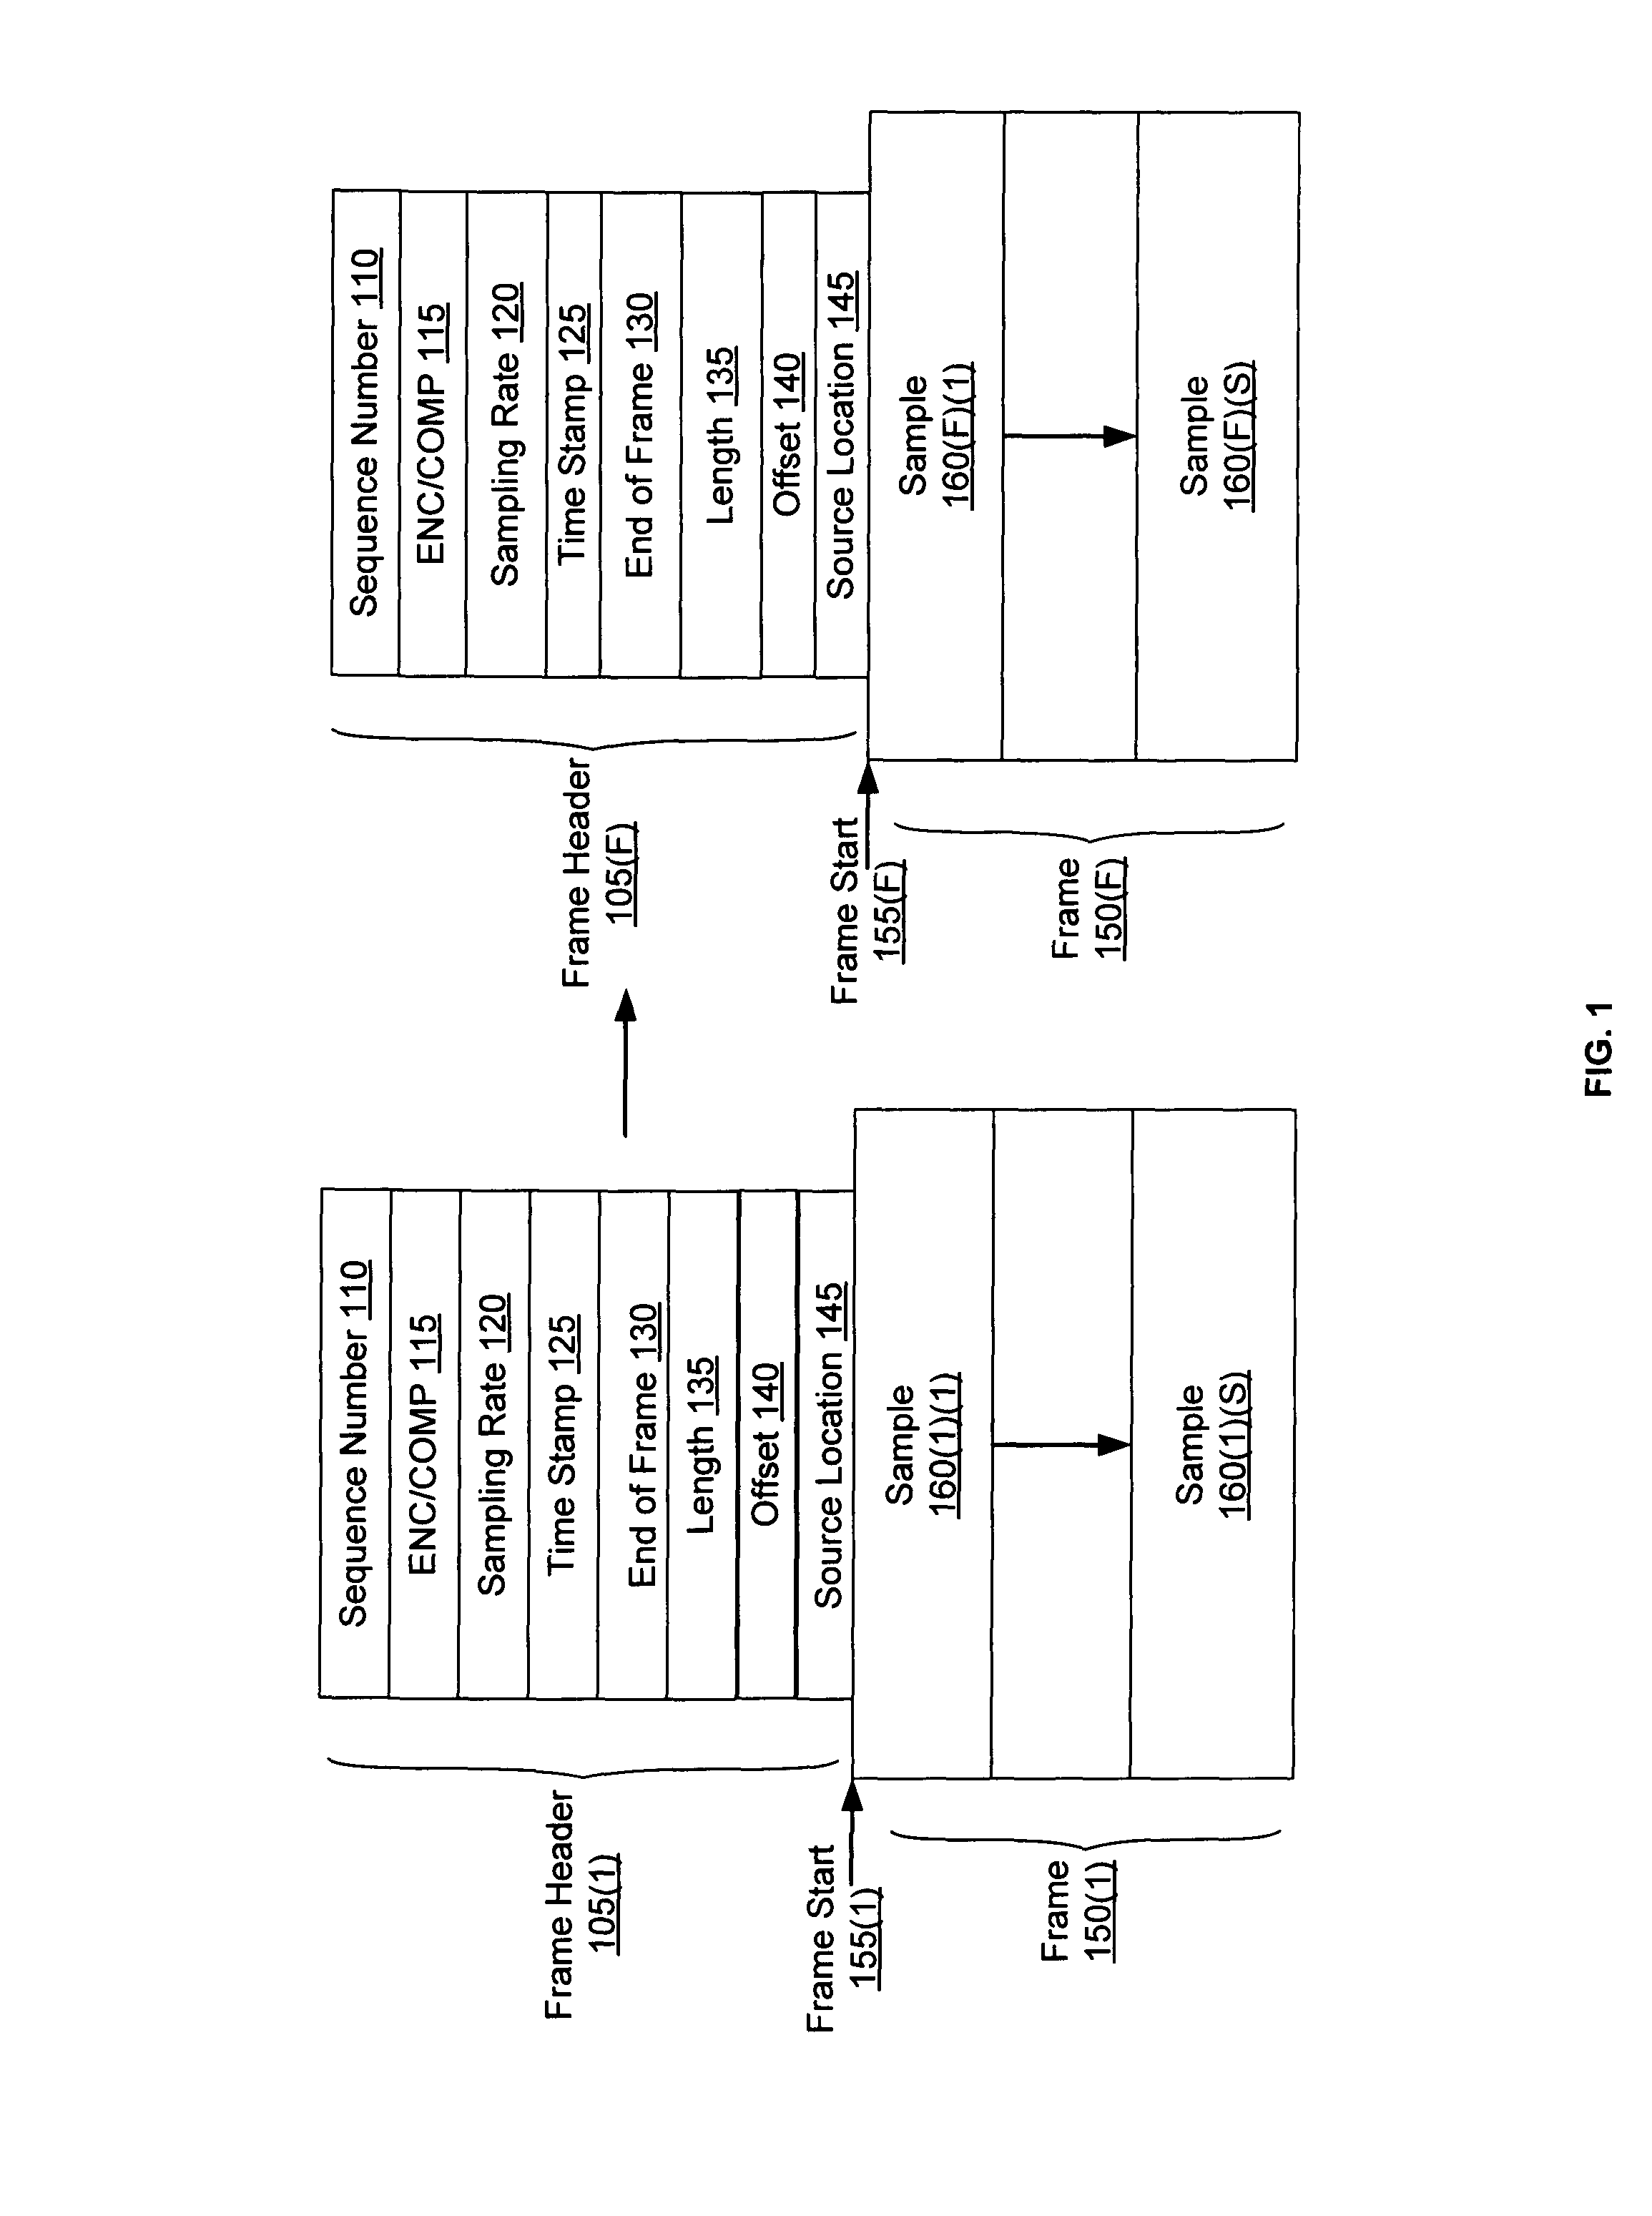 Systems and methods for synchronizing operations among a plurality of independently clocked digital data processing devices that independently source digital data